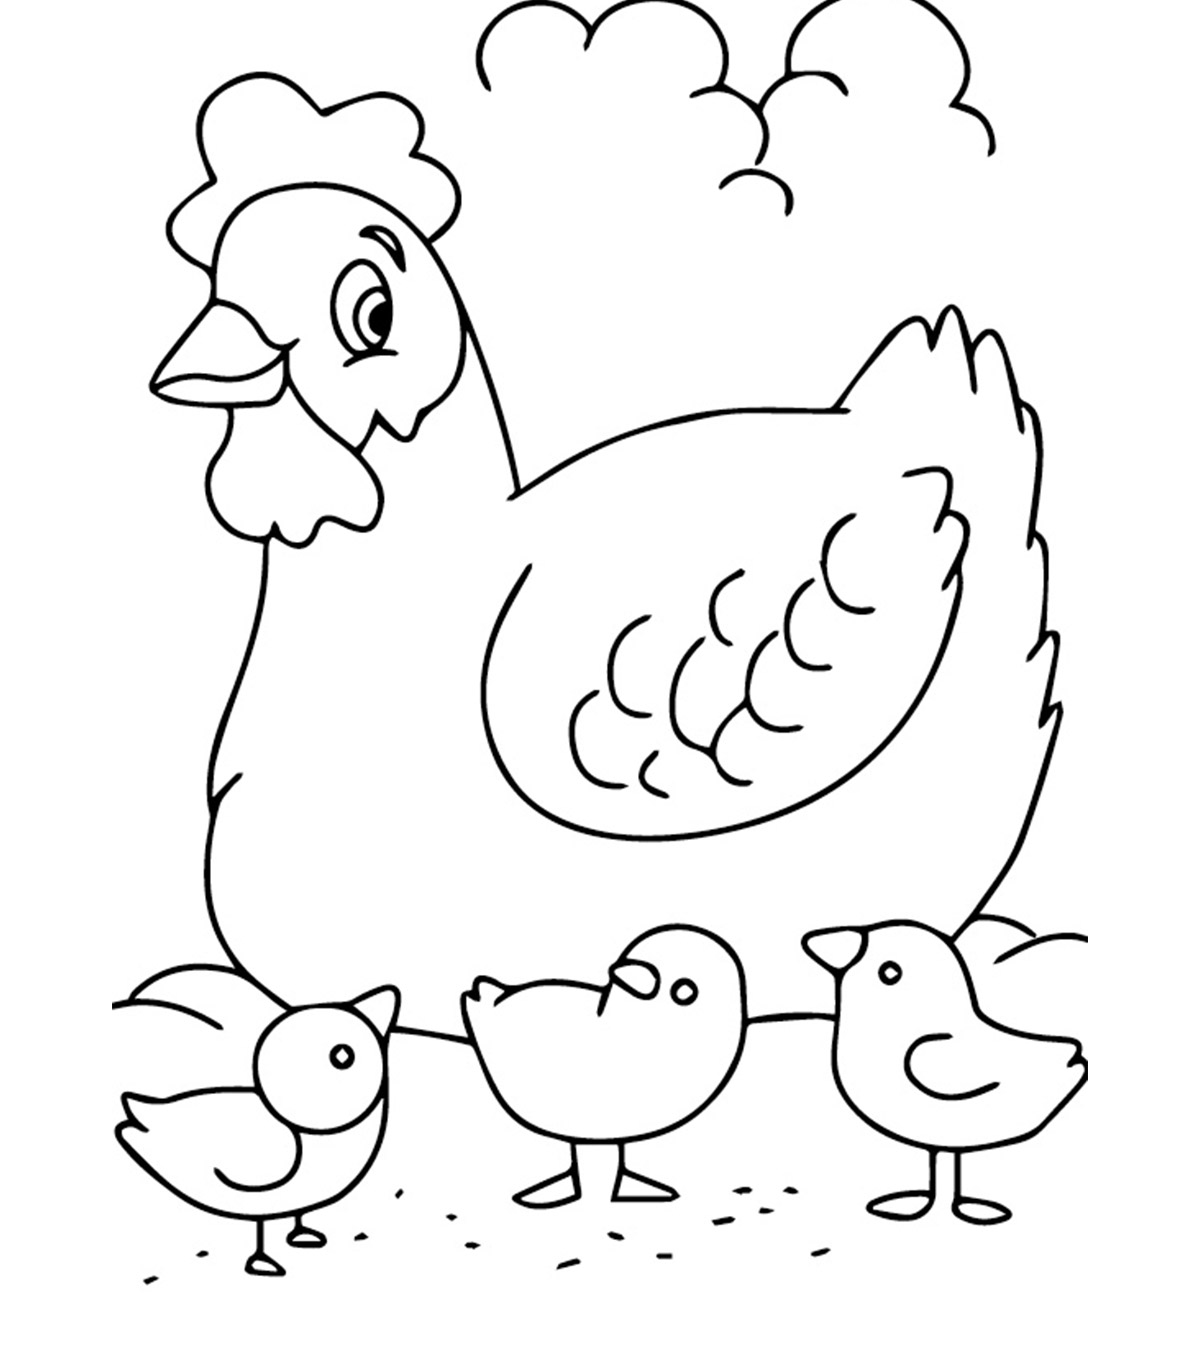 Download Coloring Pages For Farm Animals Printable Coloring Export 115 Conservation